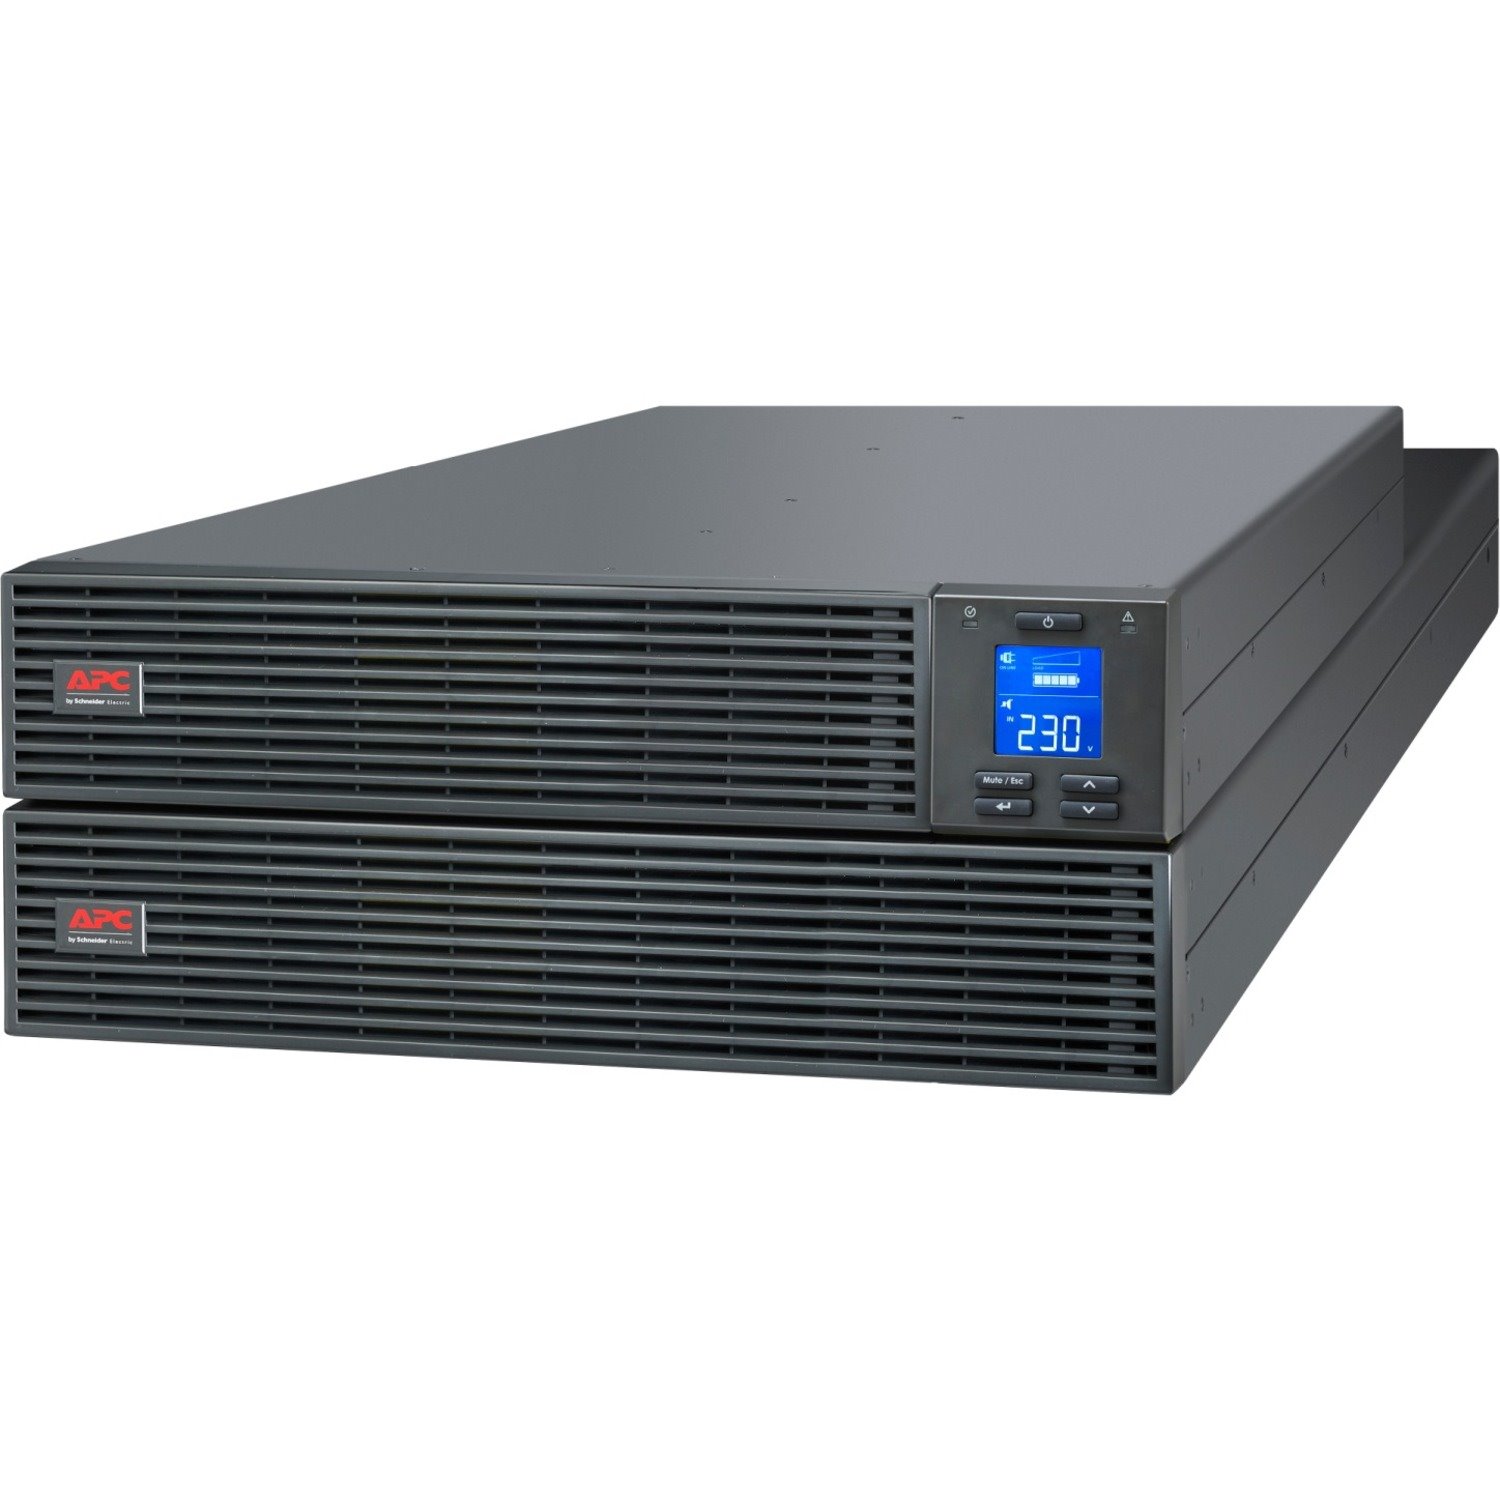 APC by Schneider Electric Easy UPS SRV6KRIRK Double Conversion Online UPS - 6 kVA/6 kW